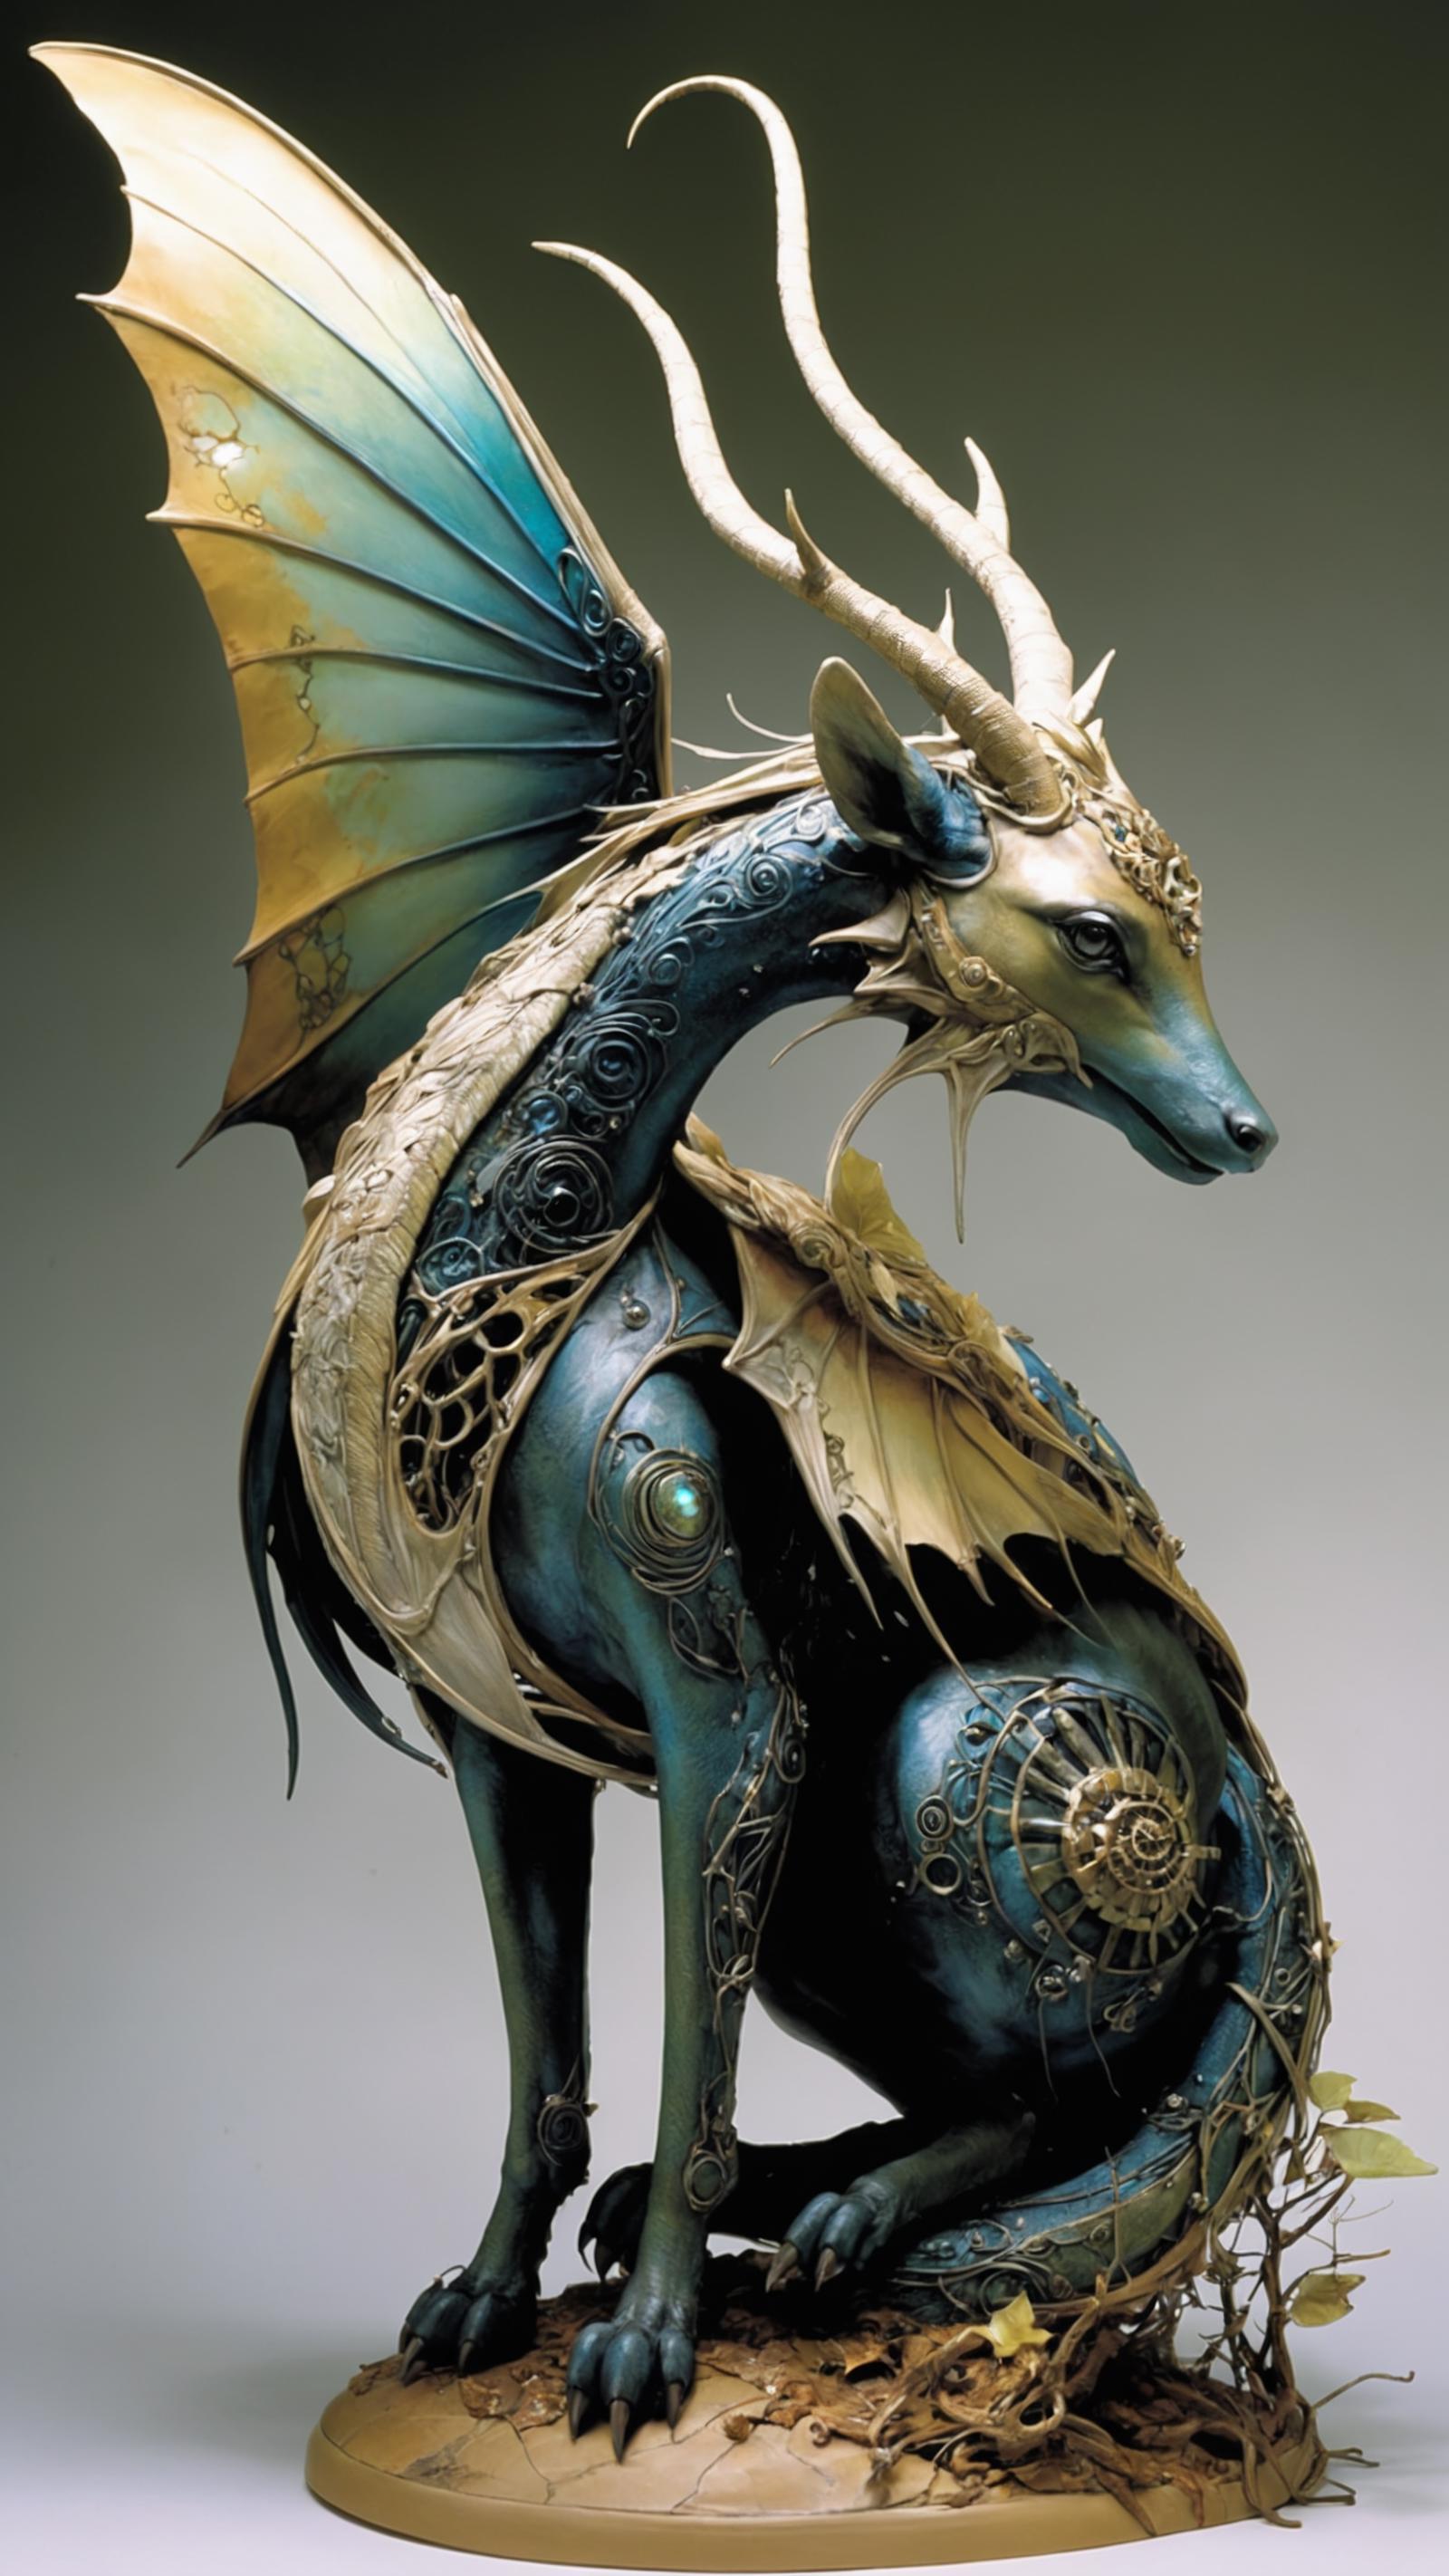 A blue and gold dragon sculpture with wings and horns.